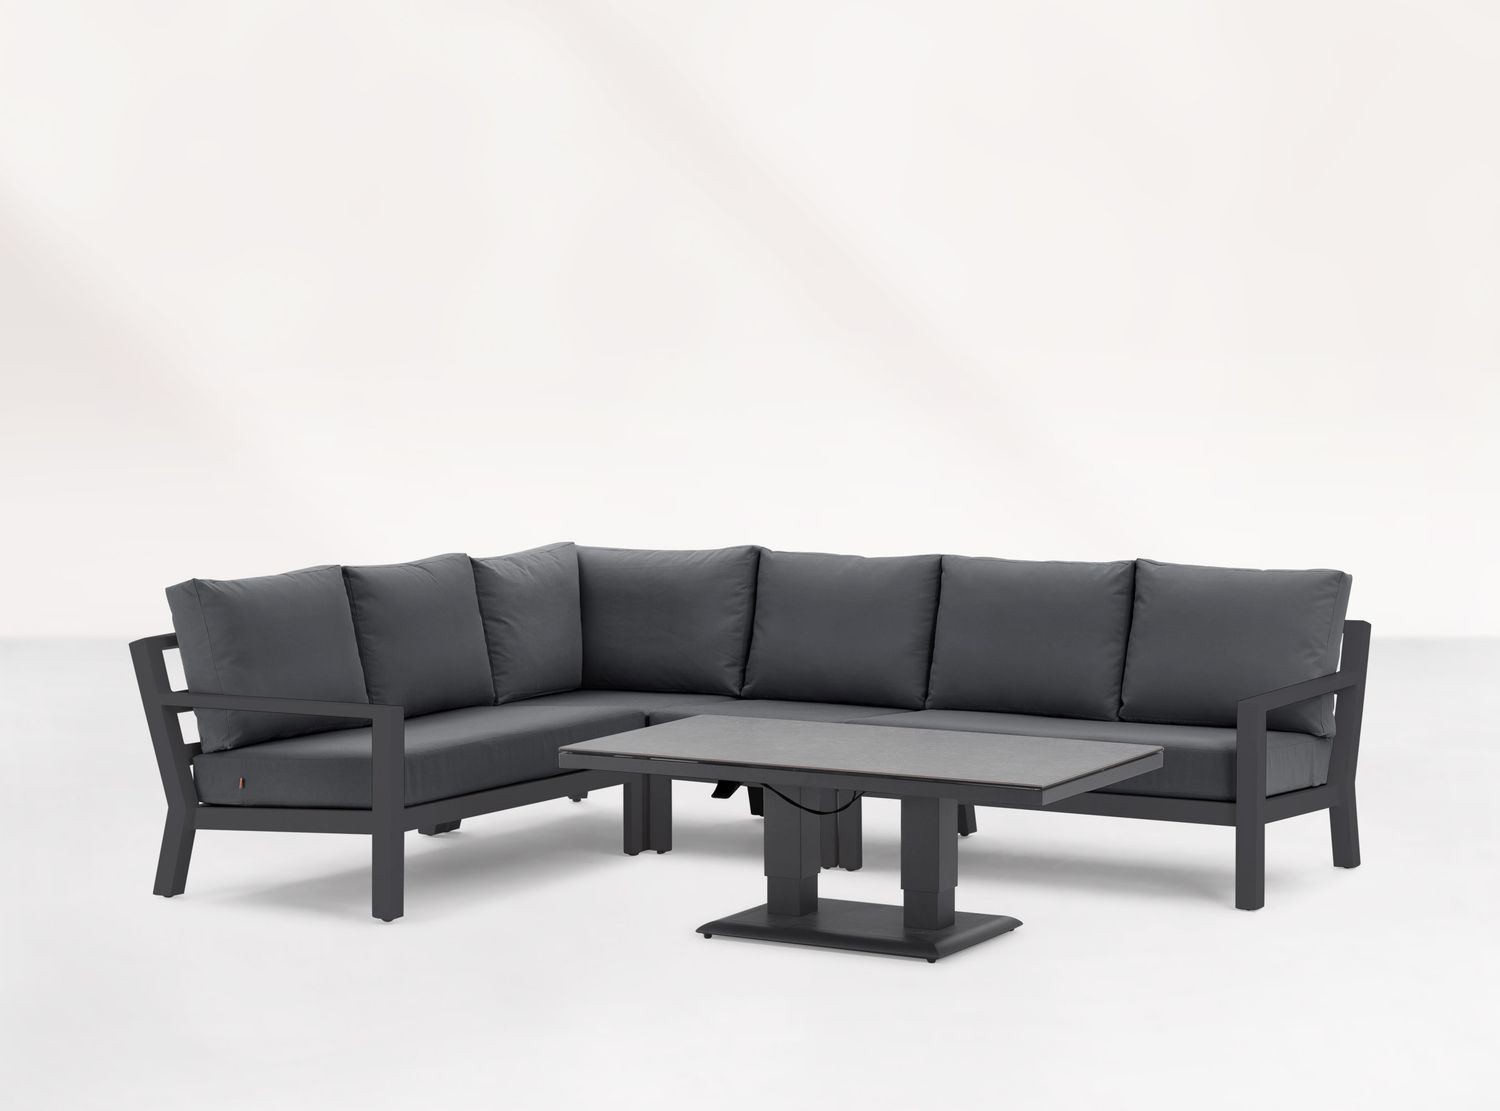 LIFE Dining-Loungeecke Set1 TIMBER lava inkl. Polster in